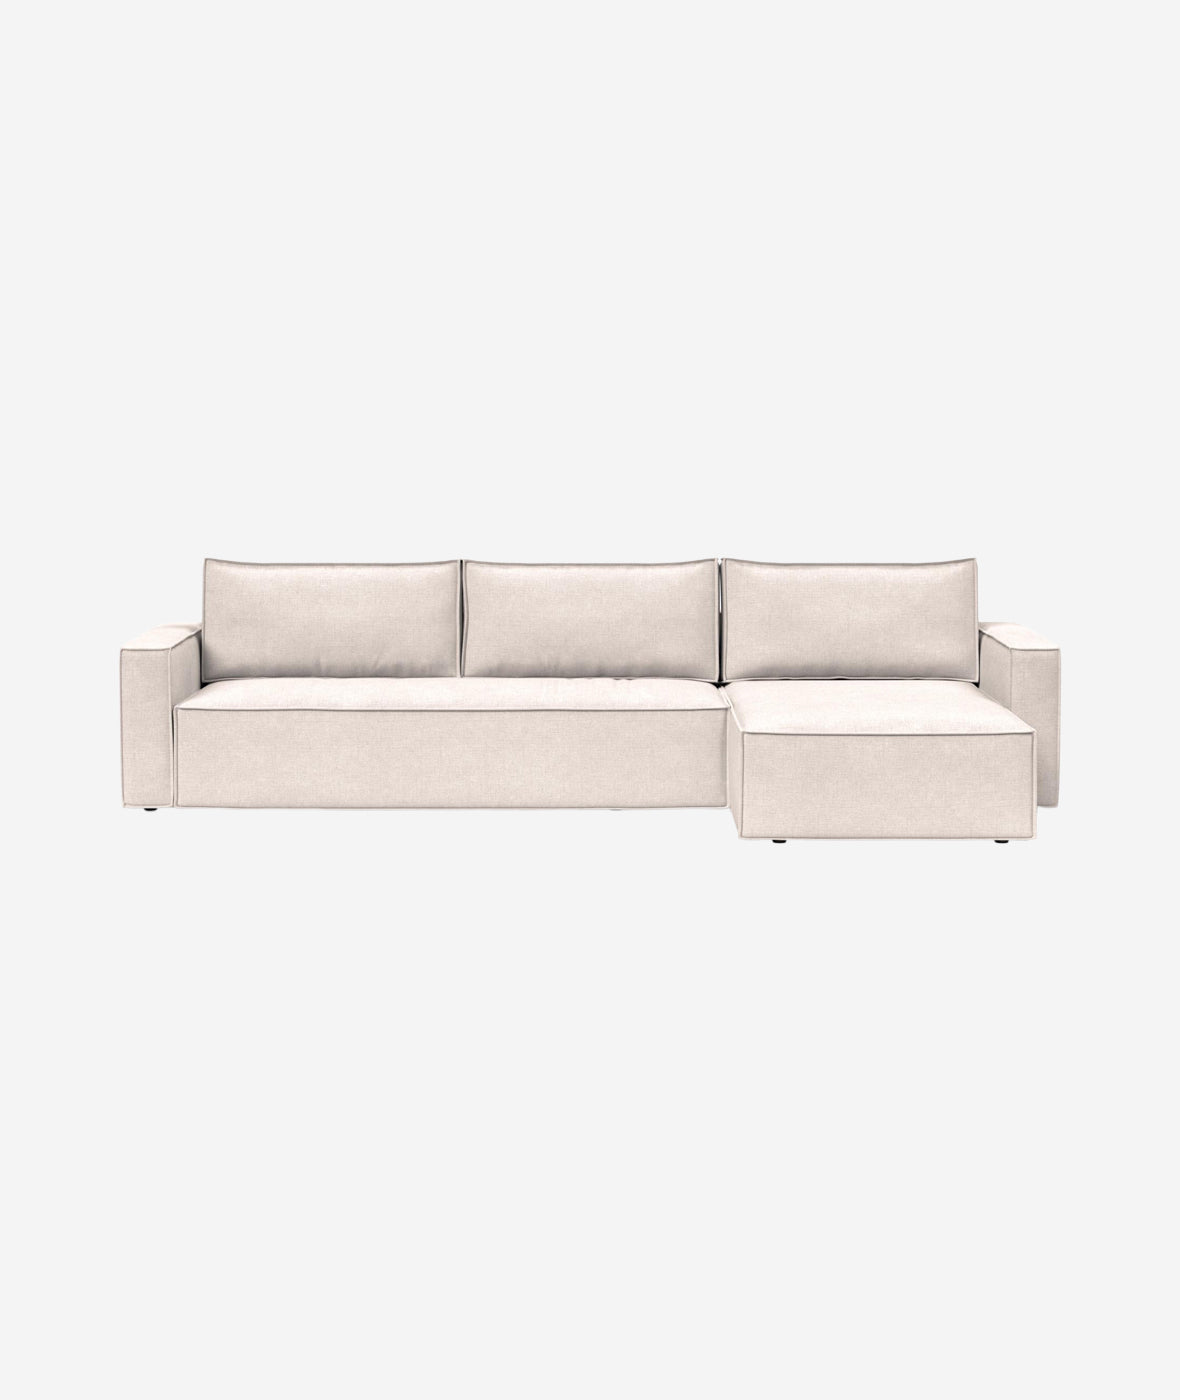 Newilla Sofa Bed w/Lounger - More Options